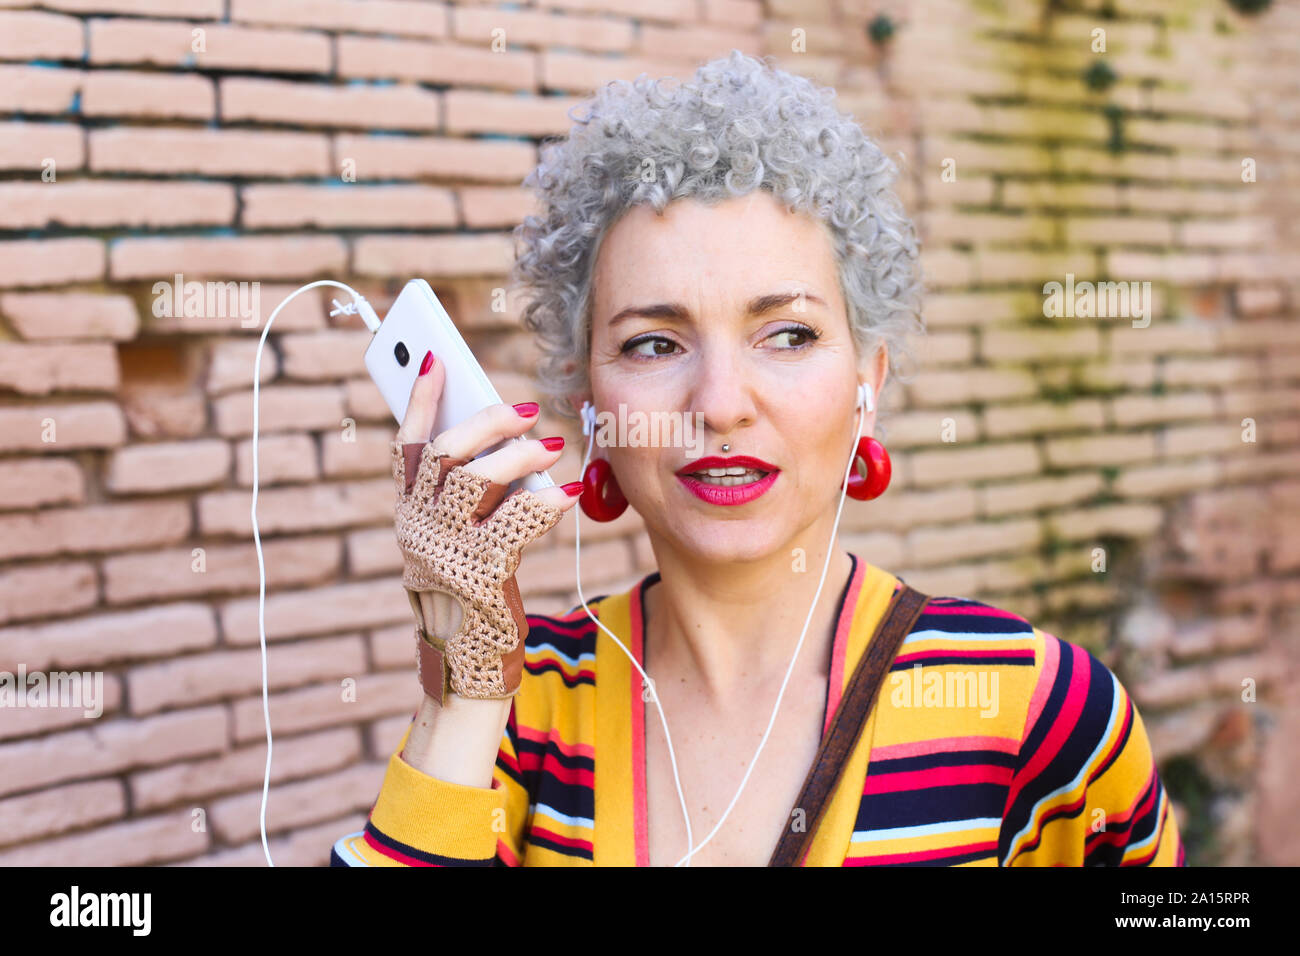 Portrait of pierced mature woman on the phone Stock Photo